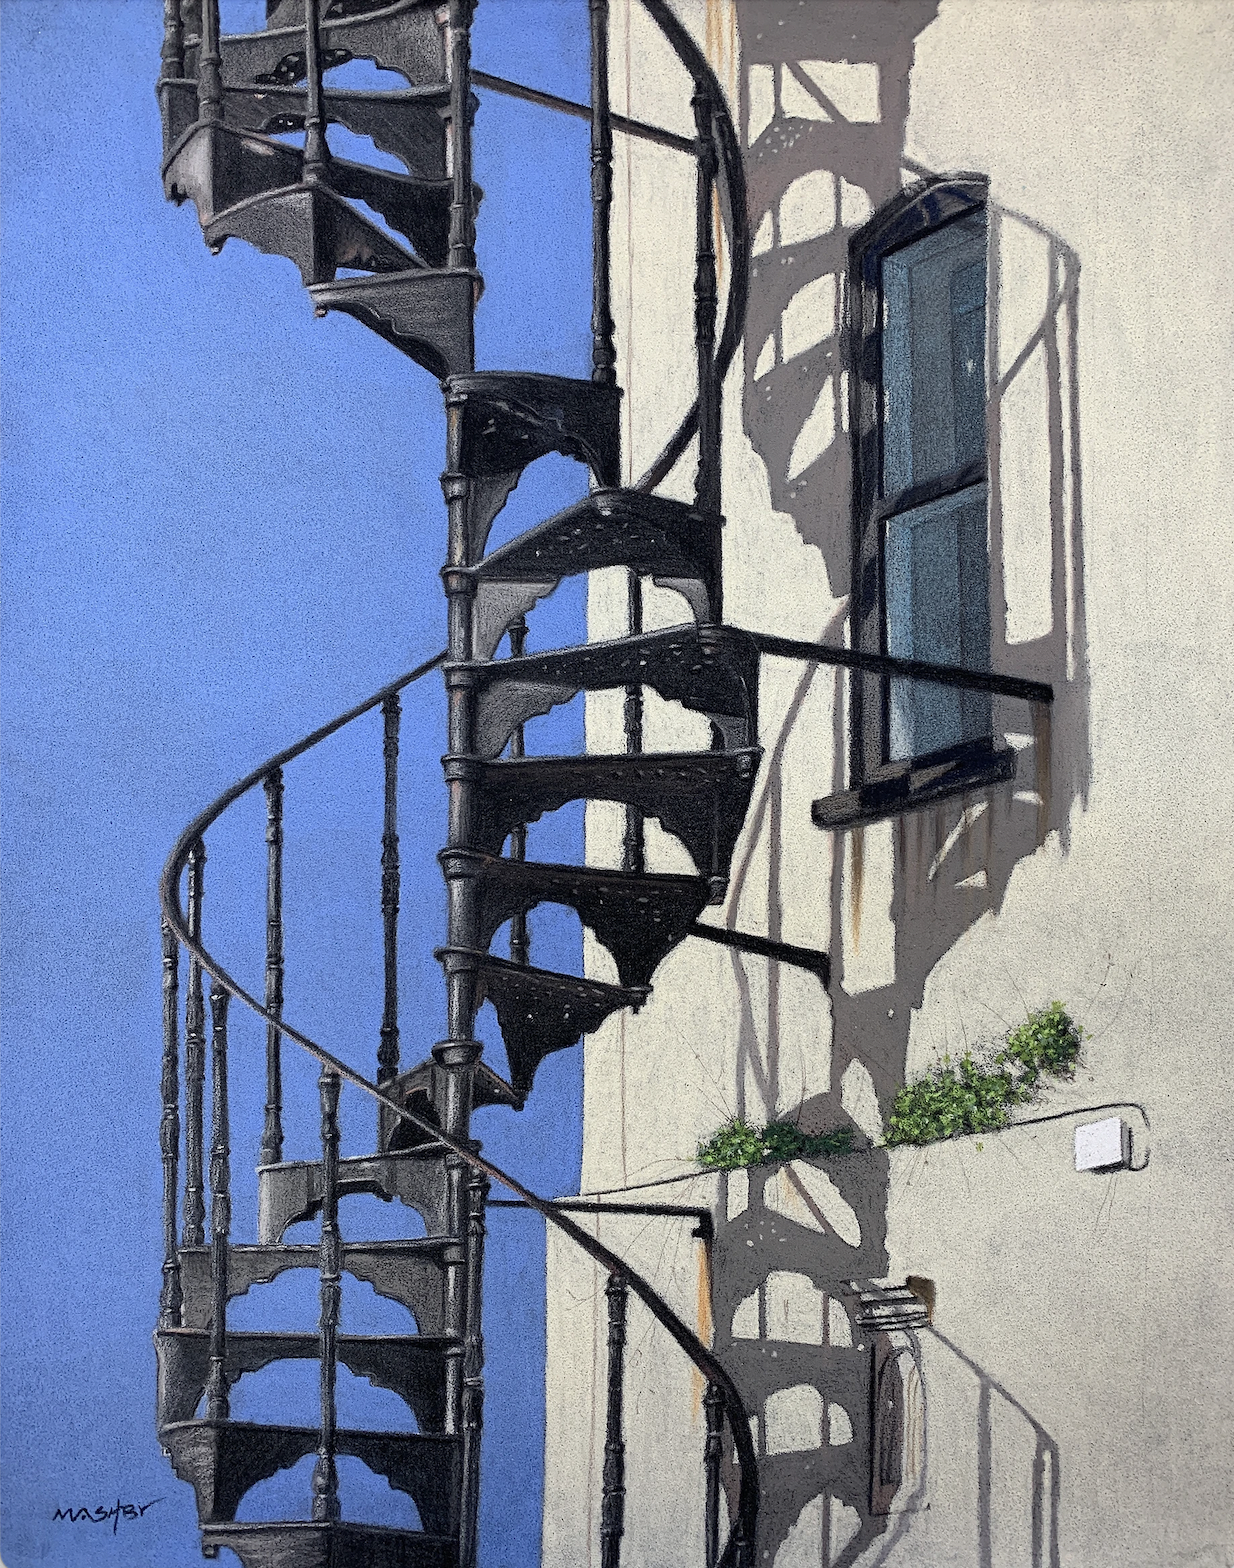 paintings of spiral staircases - Michele Ashby, "Suffolk Shadows," pastel, 32 x 25 cm